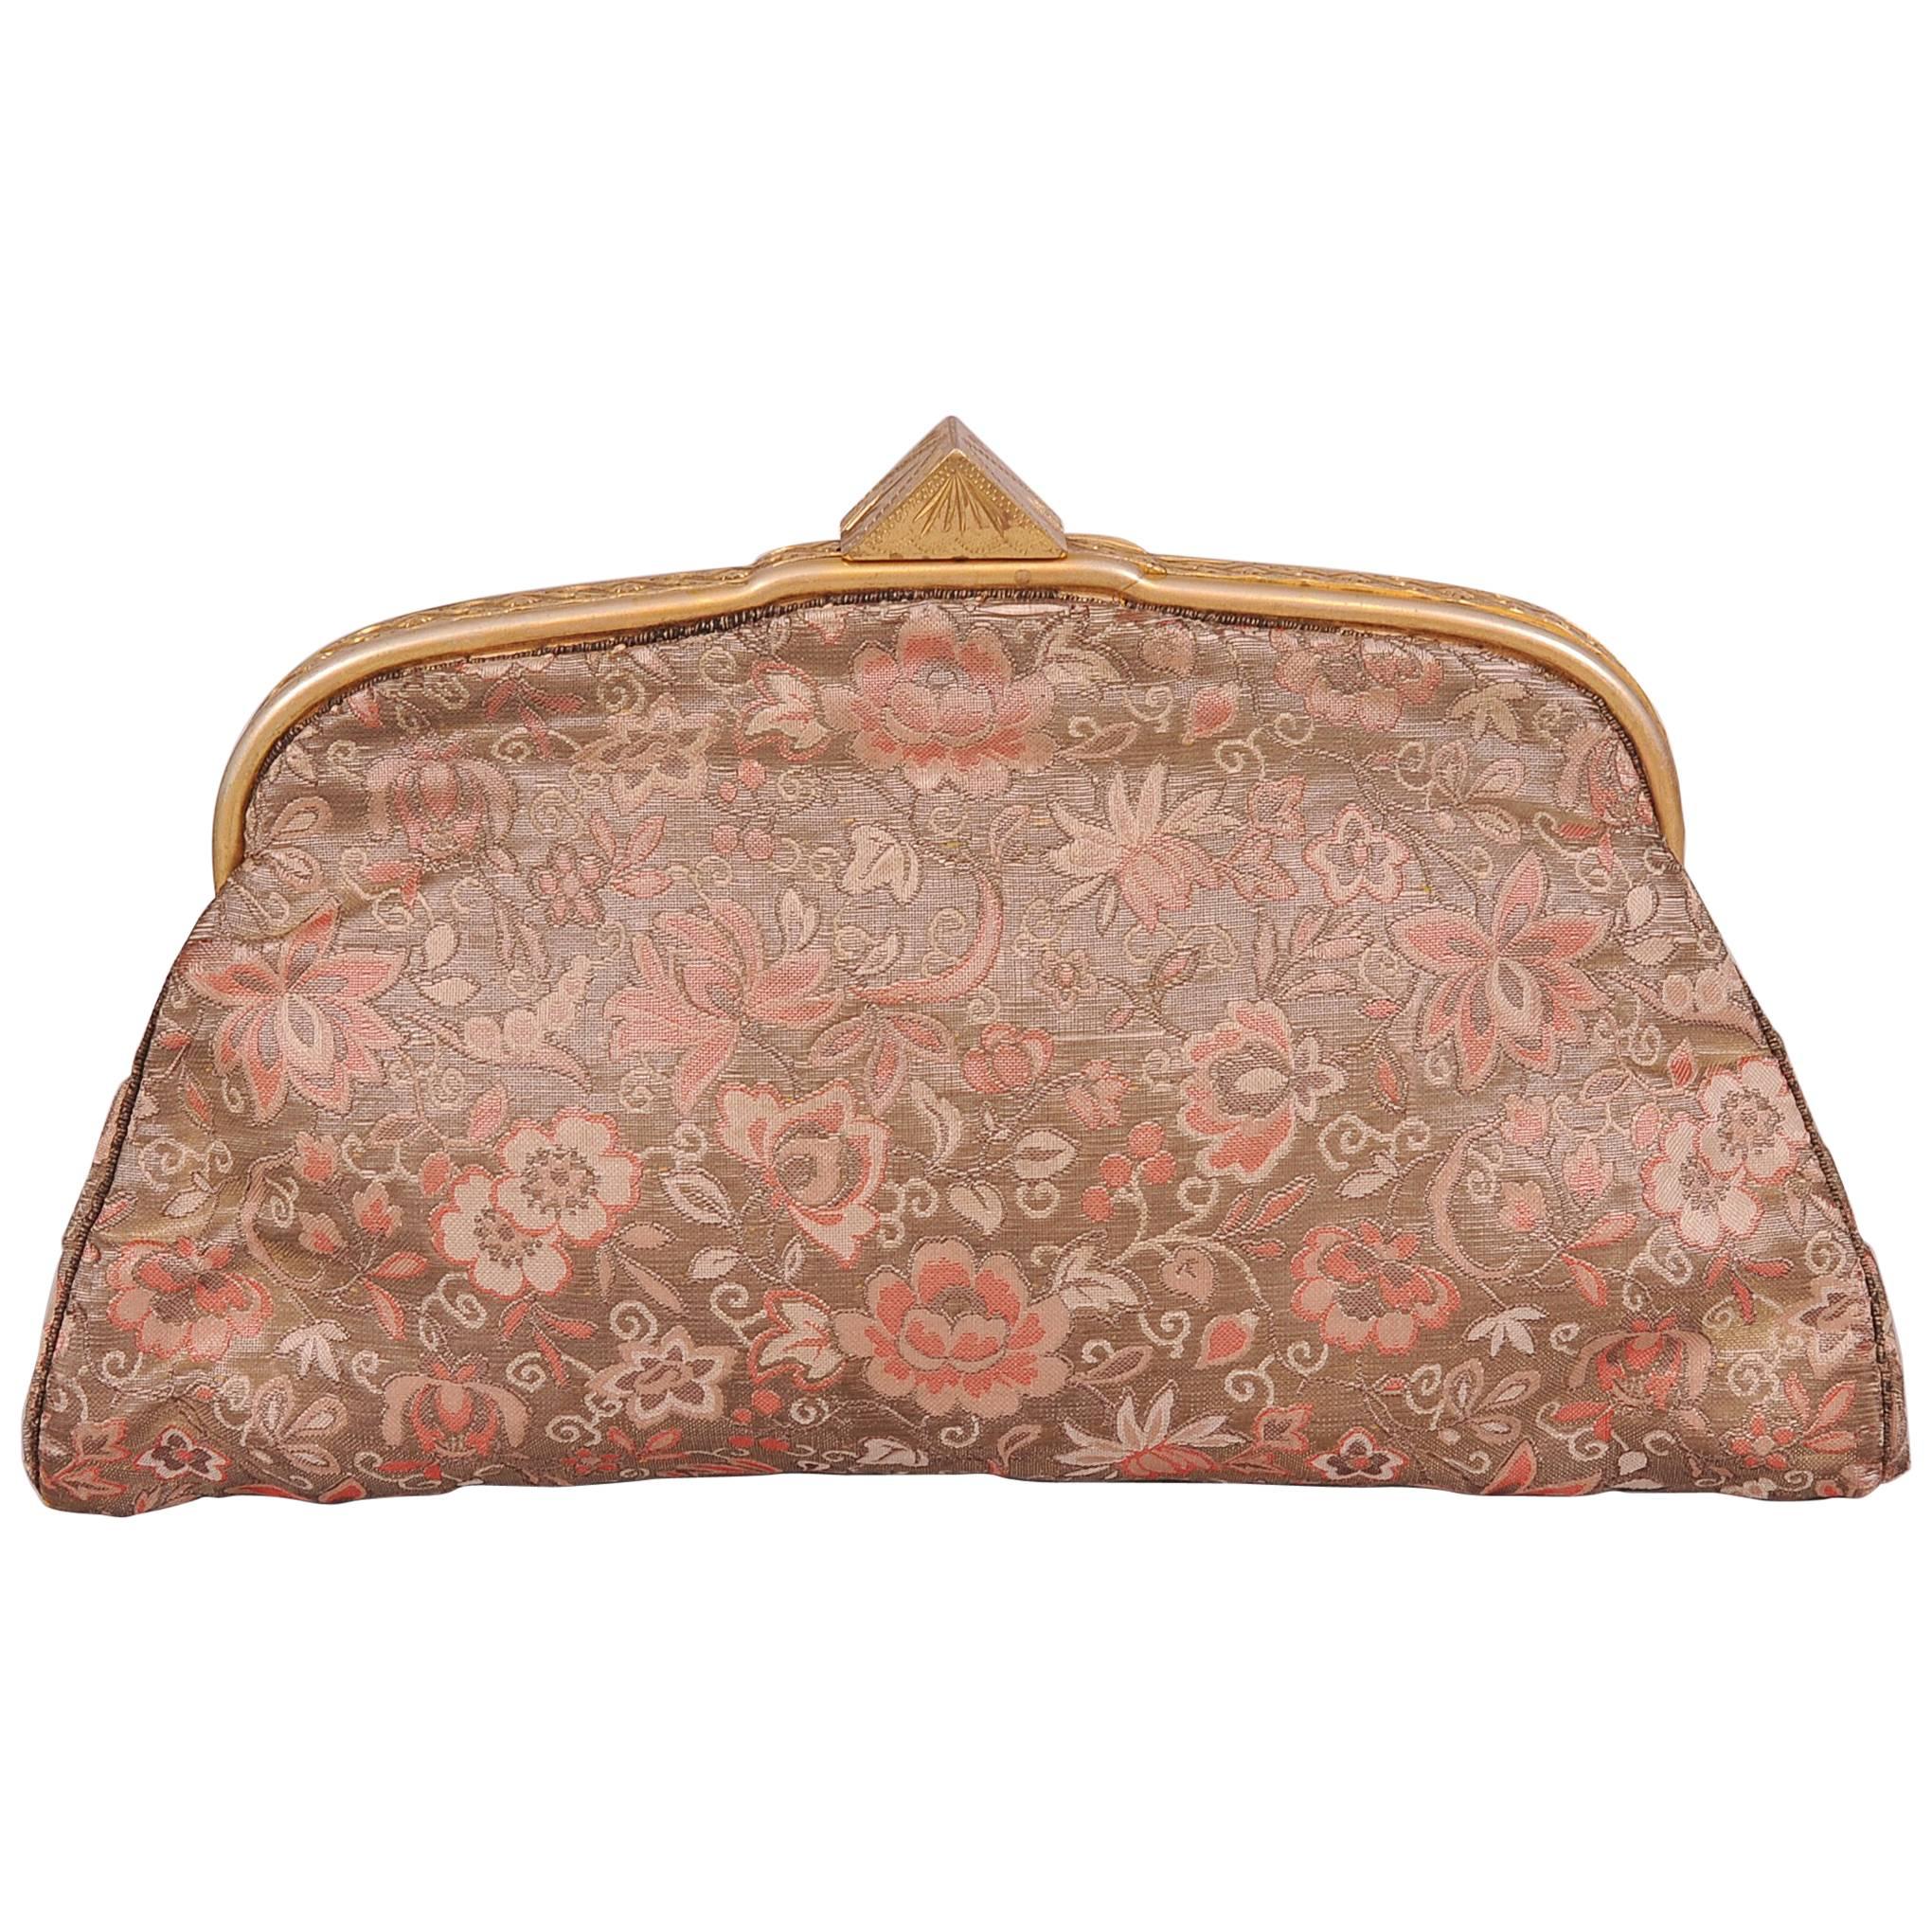 20th Century Bag from 18th Century Russian Imperial Brocade A La Vieille Russie For Sale